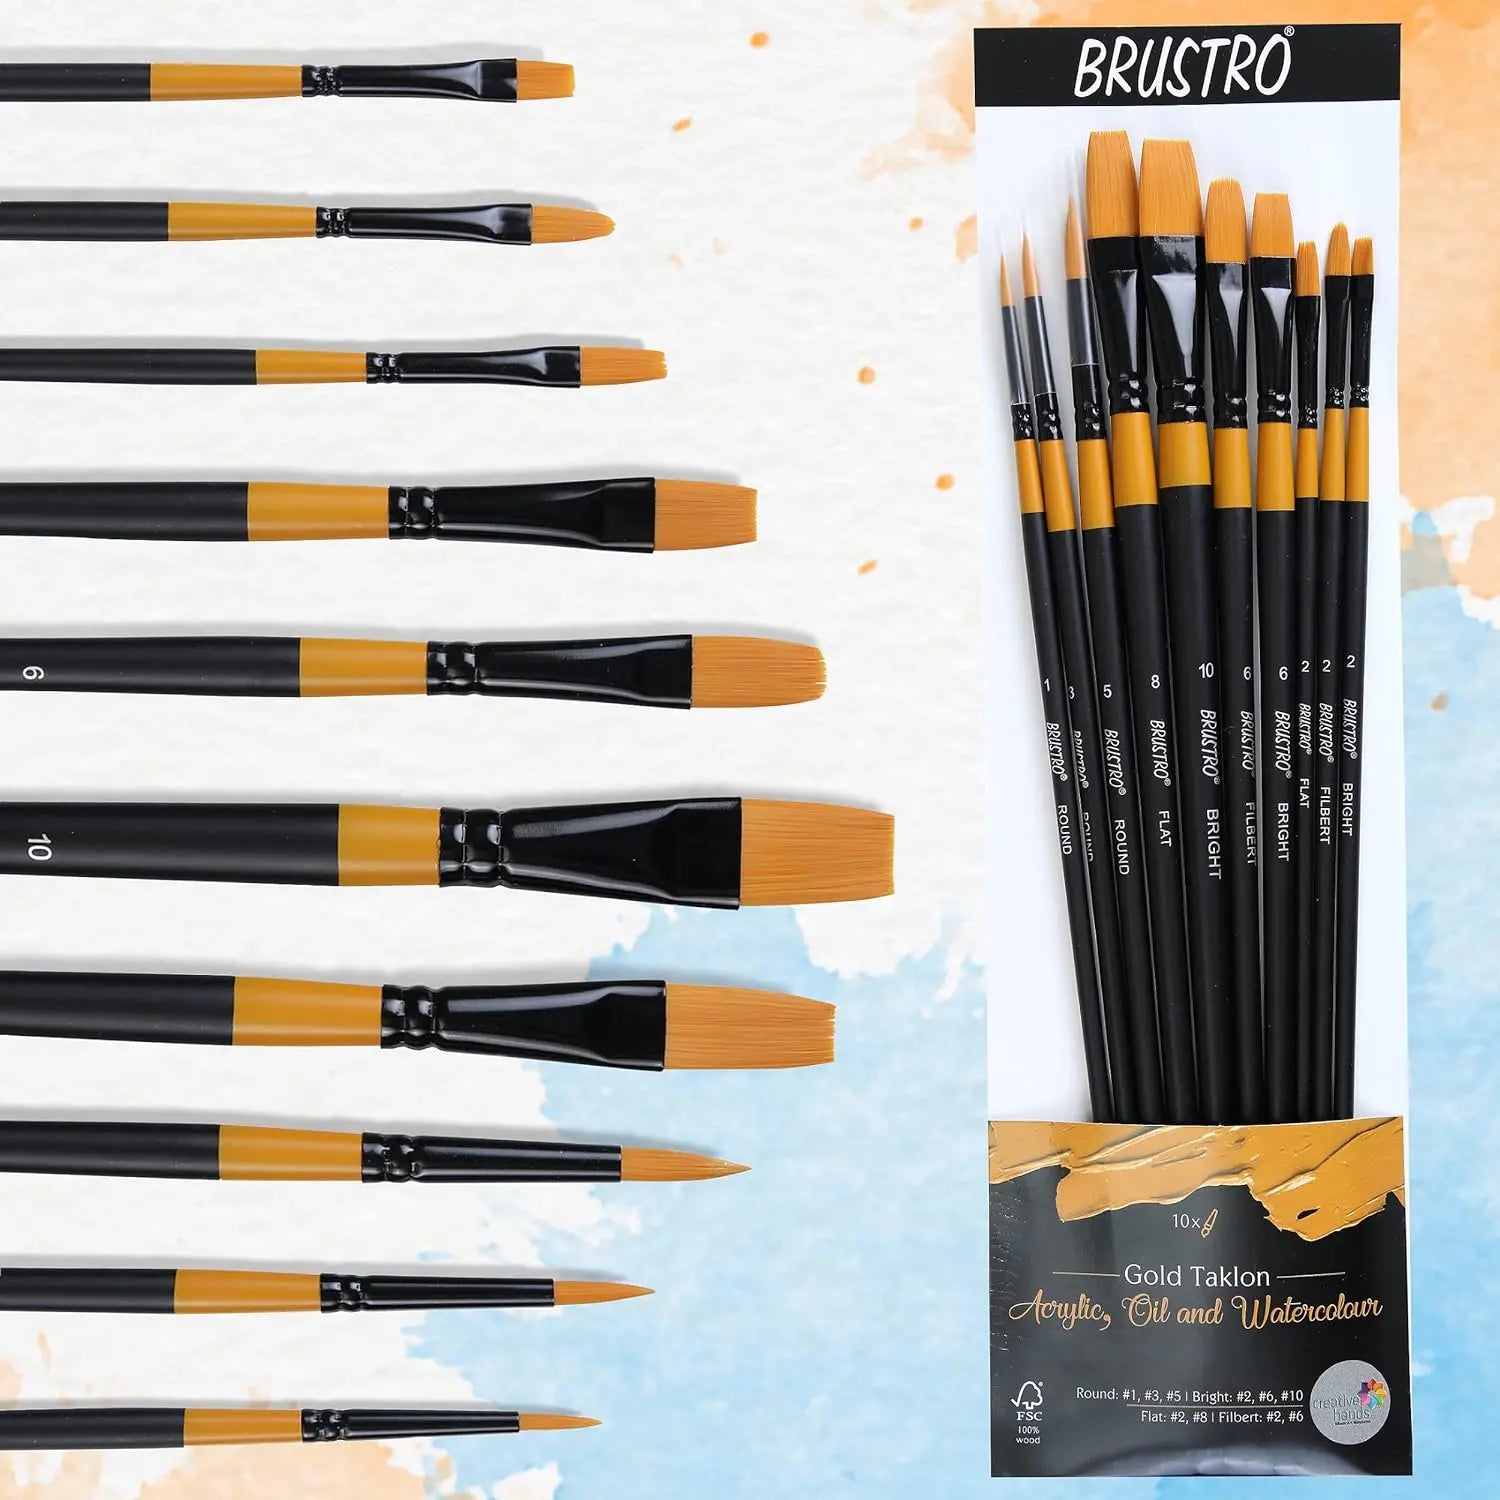 Brustro Artists Gold Taklon Brushes for Acrylics, Oil and Watercolour Set Of 10 Brustro